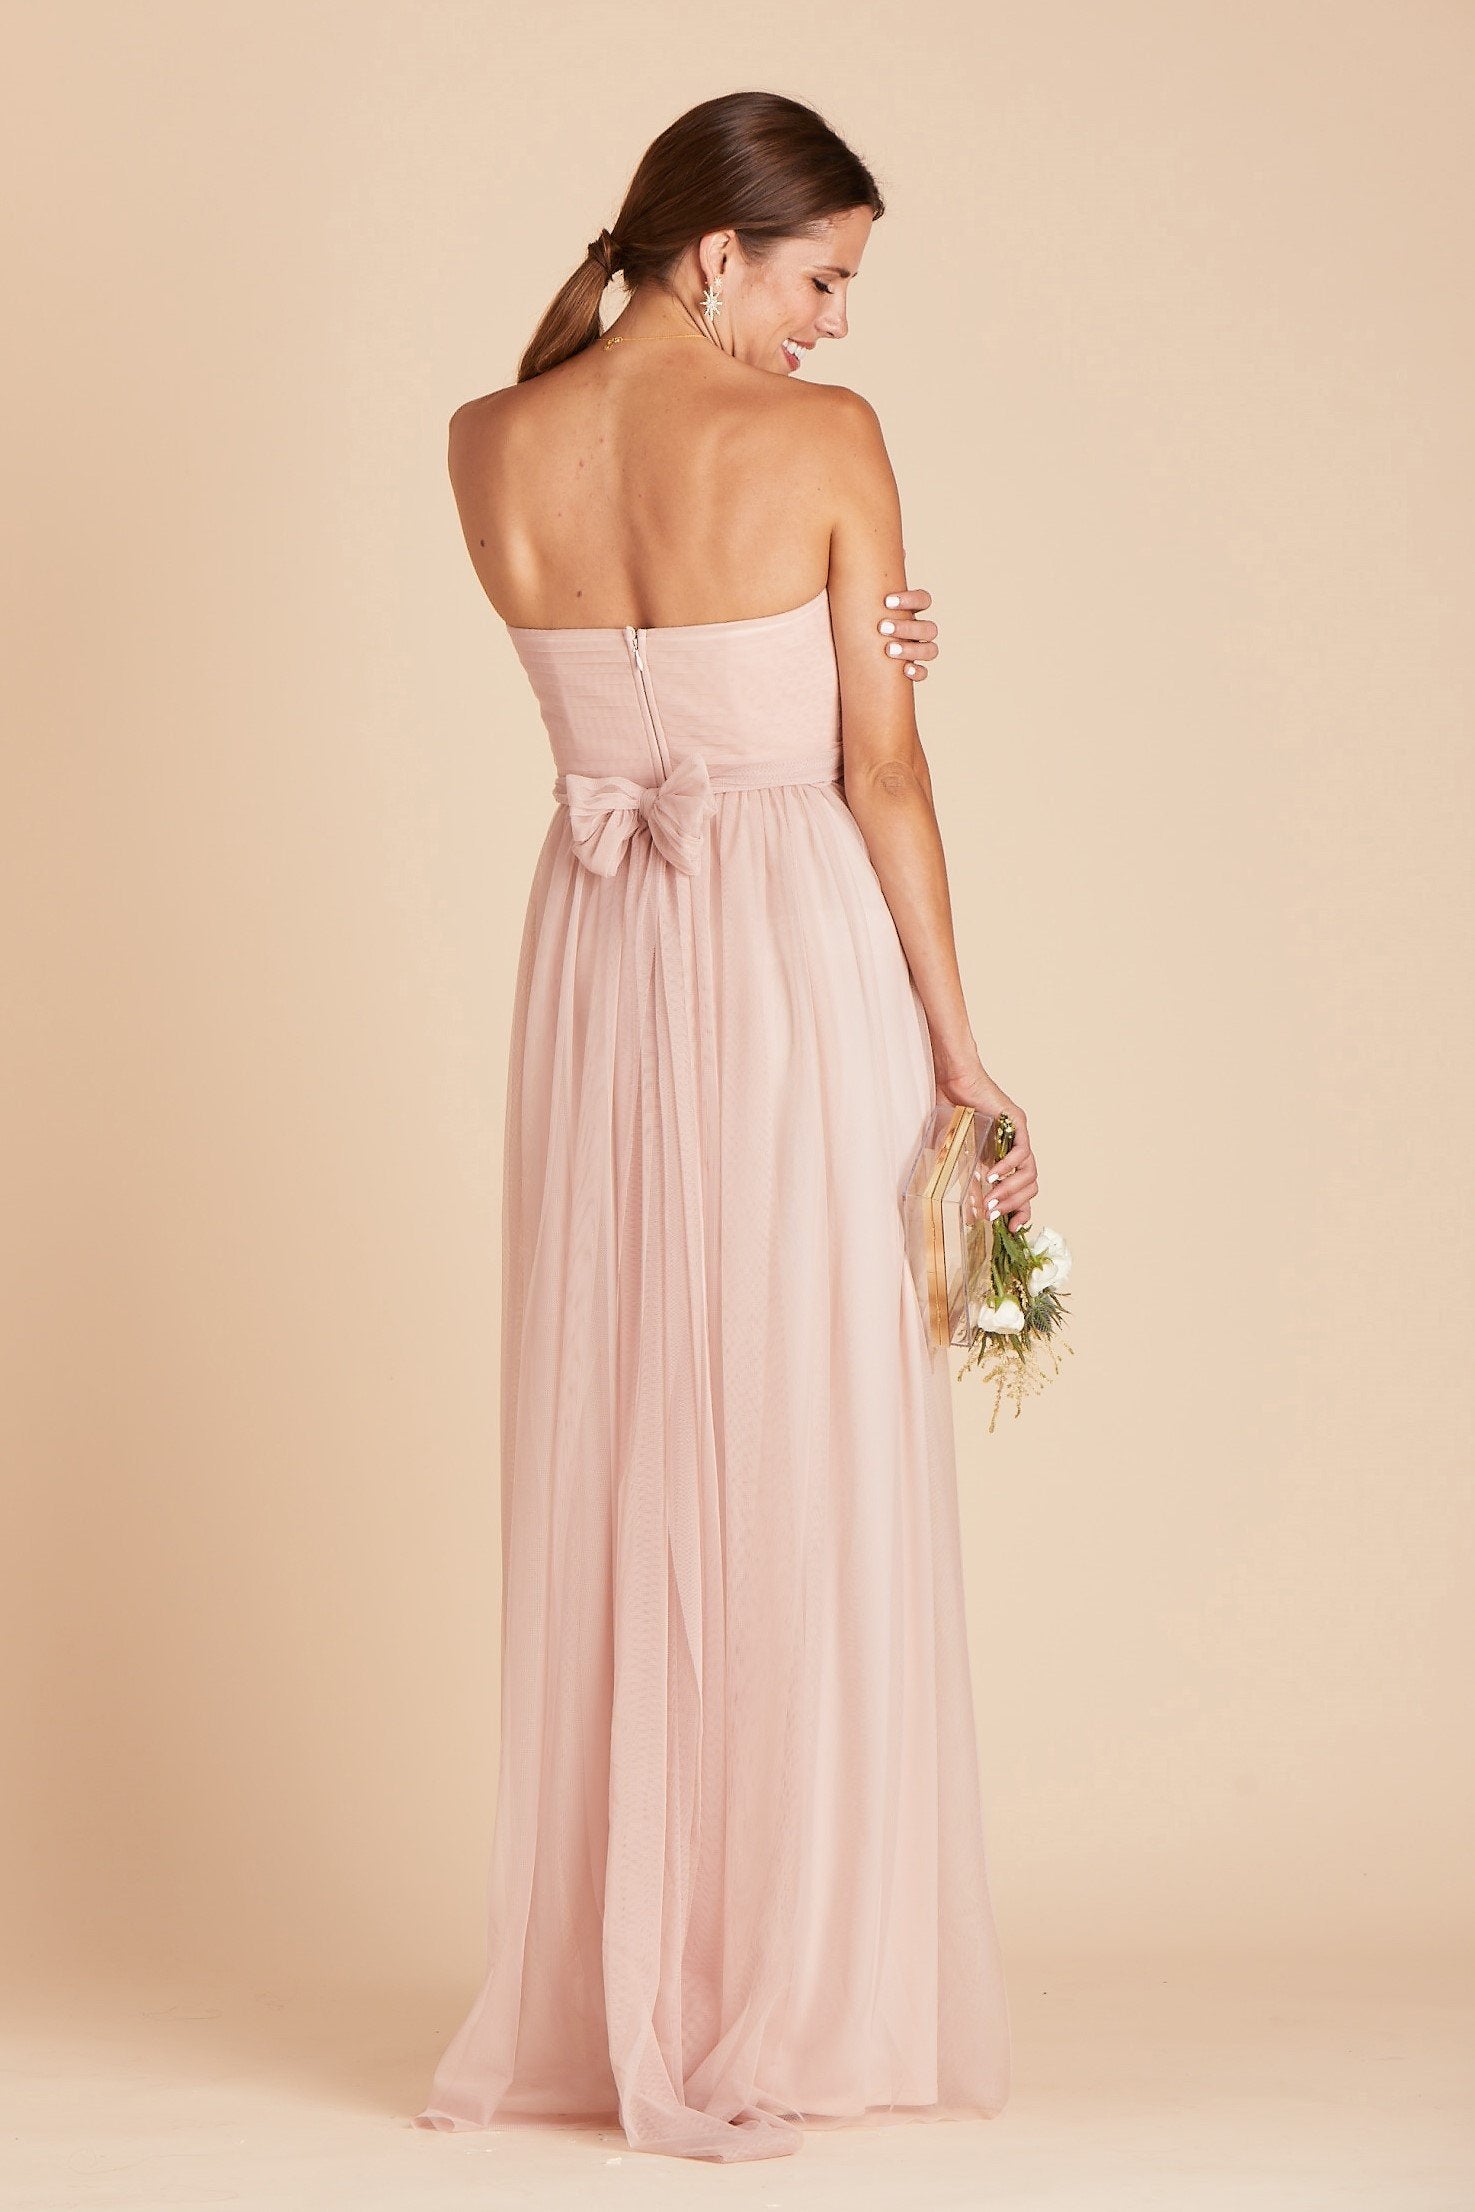 Christina convertible bridesmaid dress in vintage blush tulle by Birdy Grey, back view